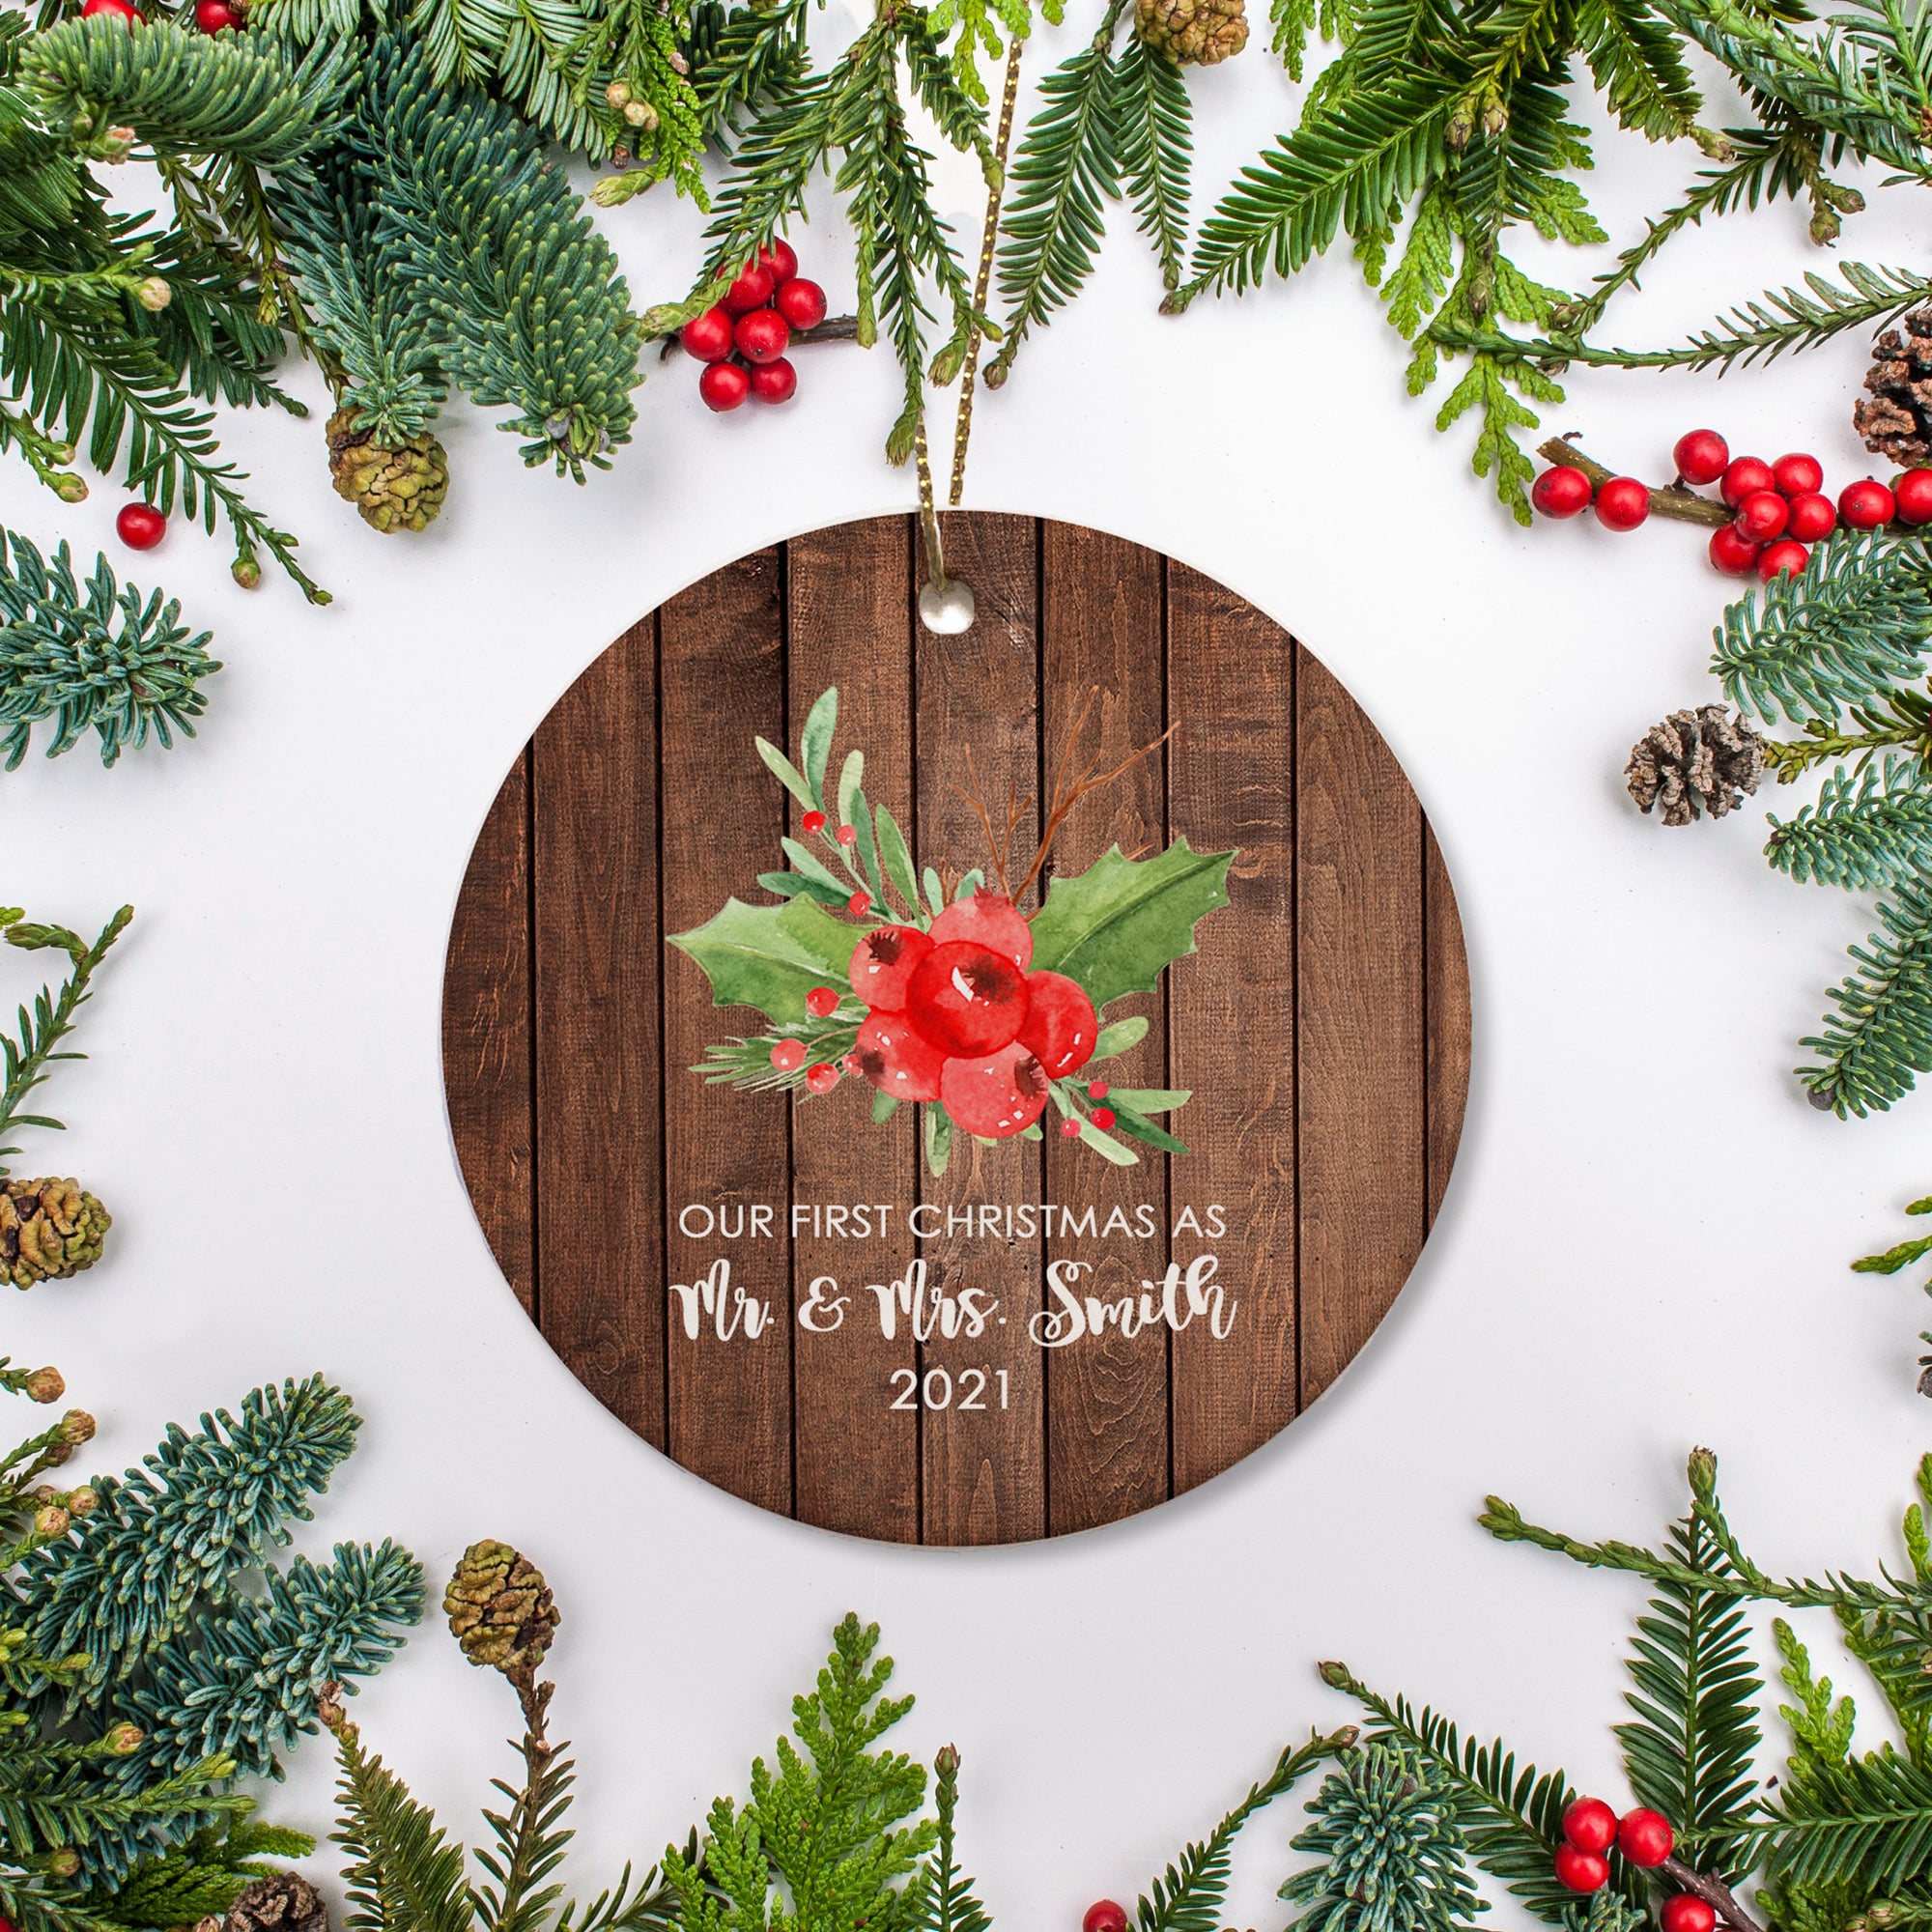 Our 1st Christmas | Newlyweds | Keepsake personalized ornament | Pipsy.com